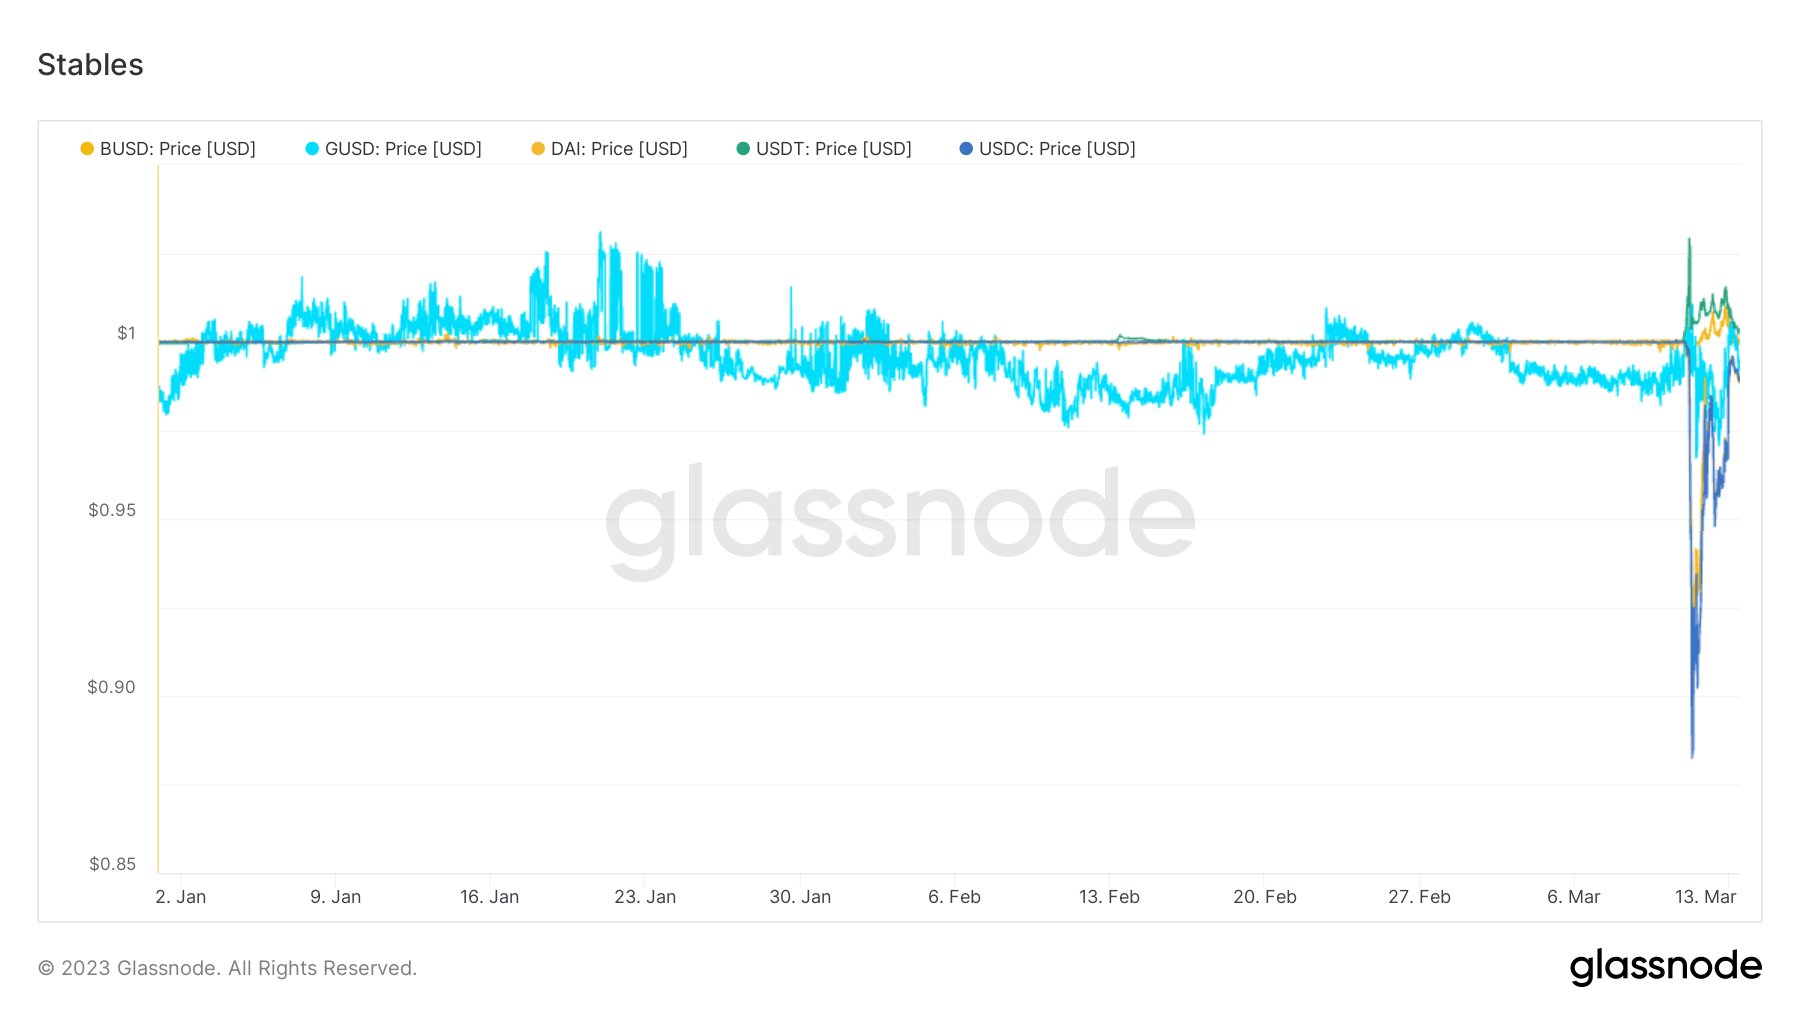 Stablecoin Price: (Source: Glassnode)